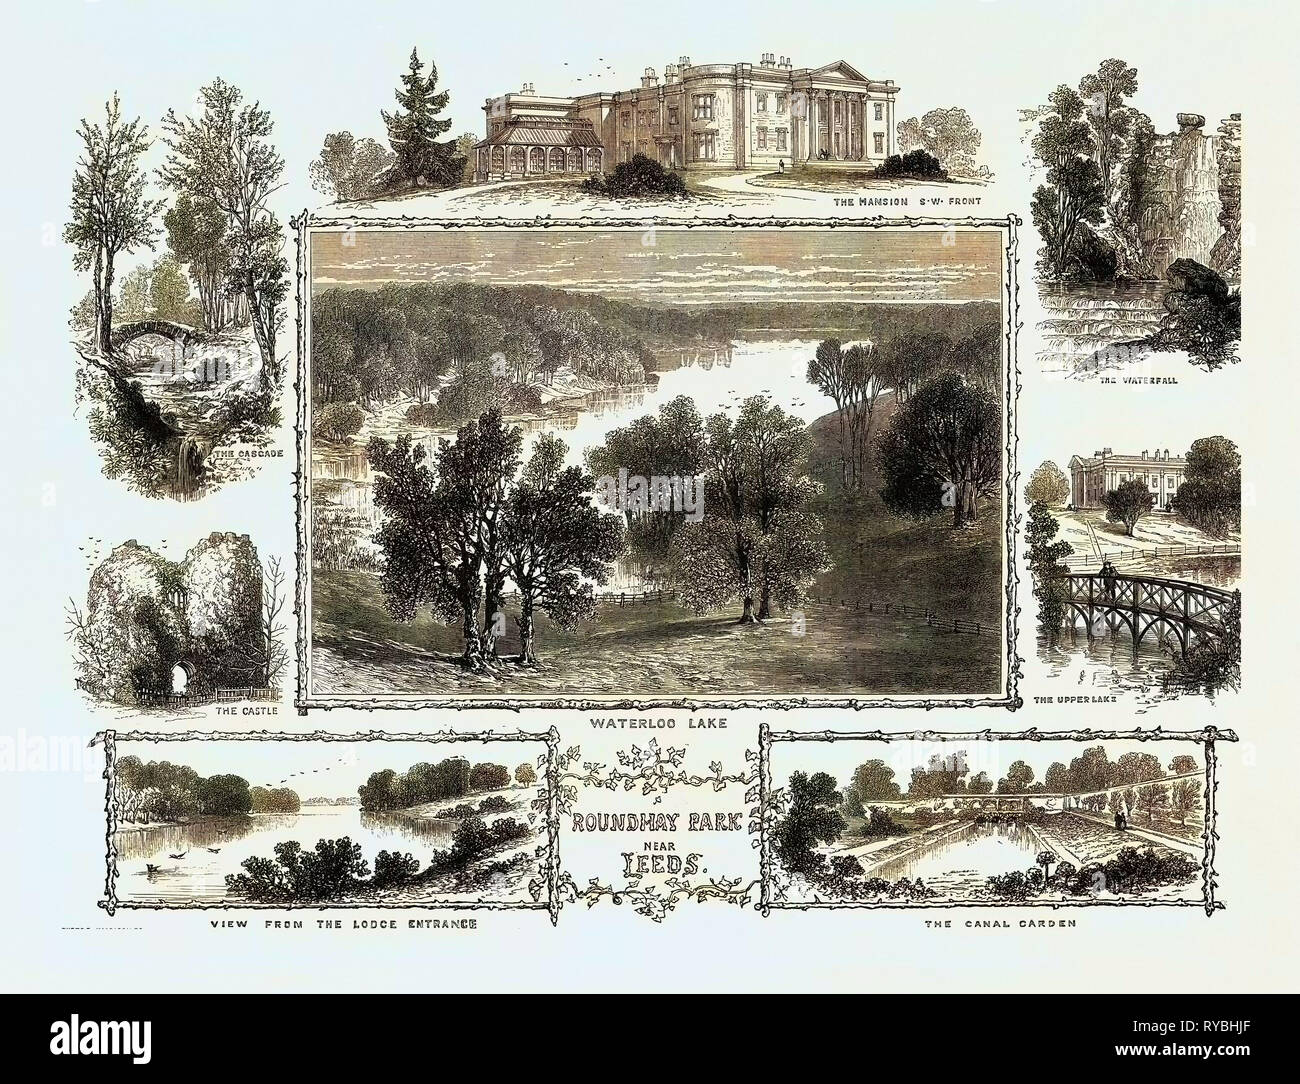 Roundhay Park Near Leeds: The Mansion, South West Front, the Waterfall, the Upperlake, Waterloo Lake, the Cascade, the Castle, View from the Lodge Entrance, the Canal Garden Stock Photo